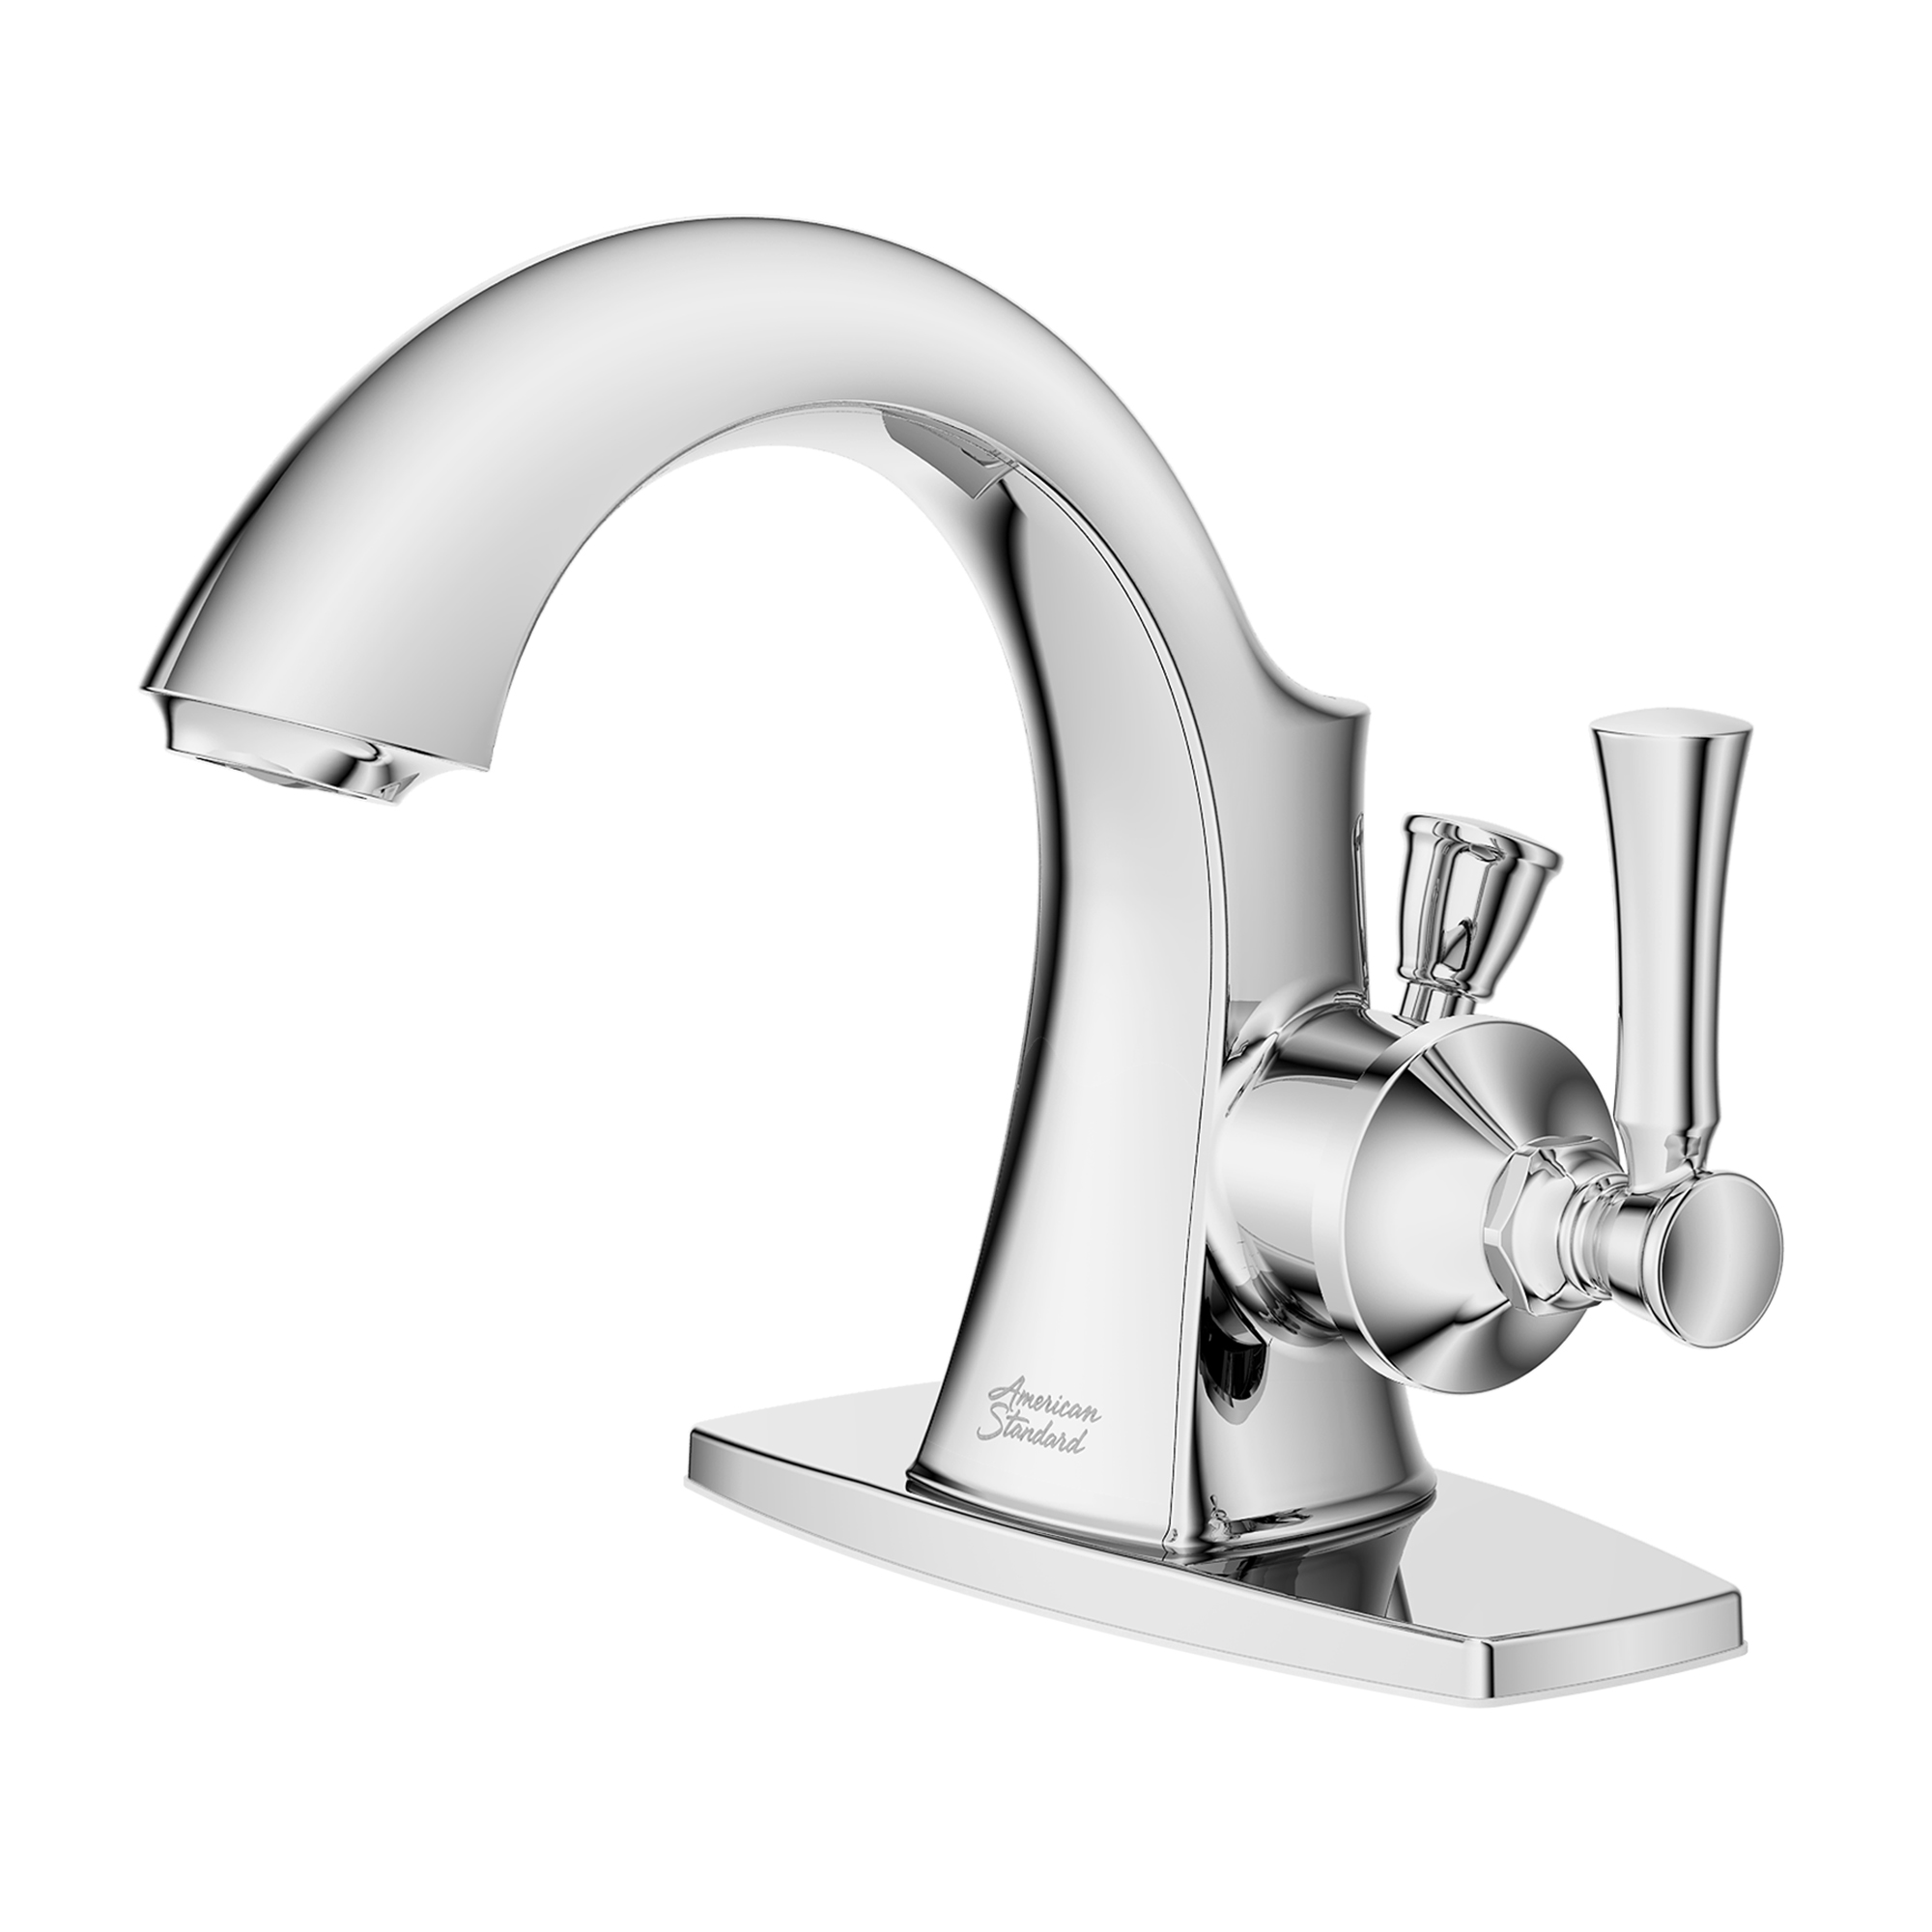 Chancellor 4-In. Centerset Single-Handle Bathroom Faucet, 1.2 GPM with Lever Handle